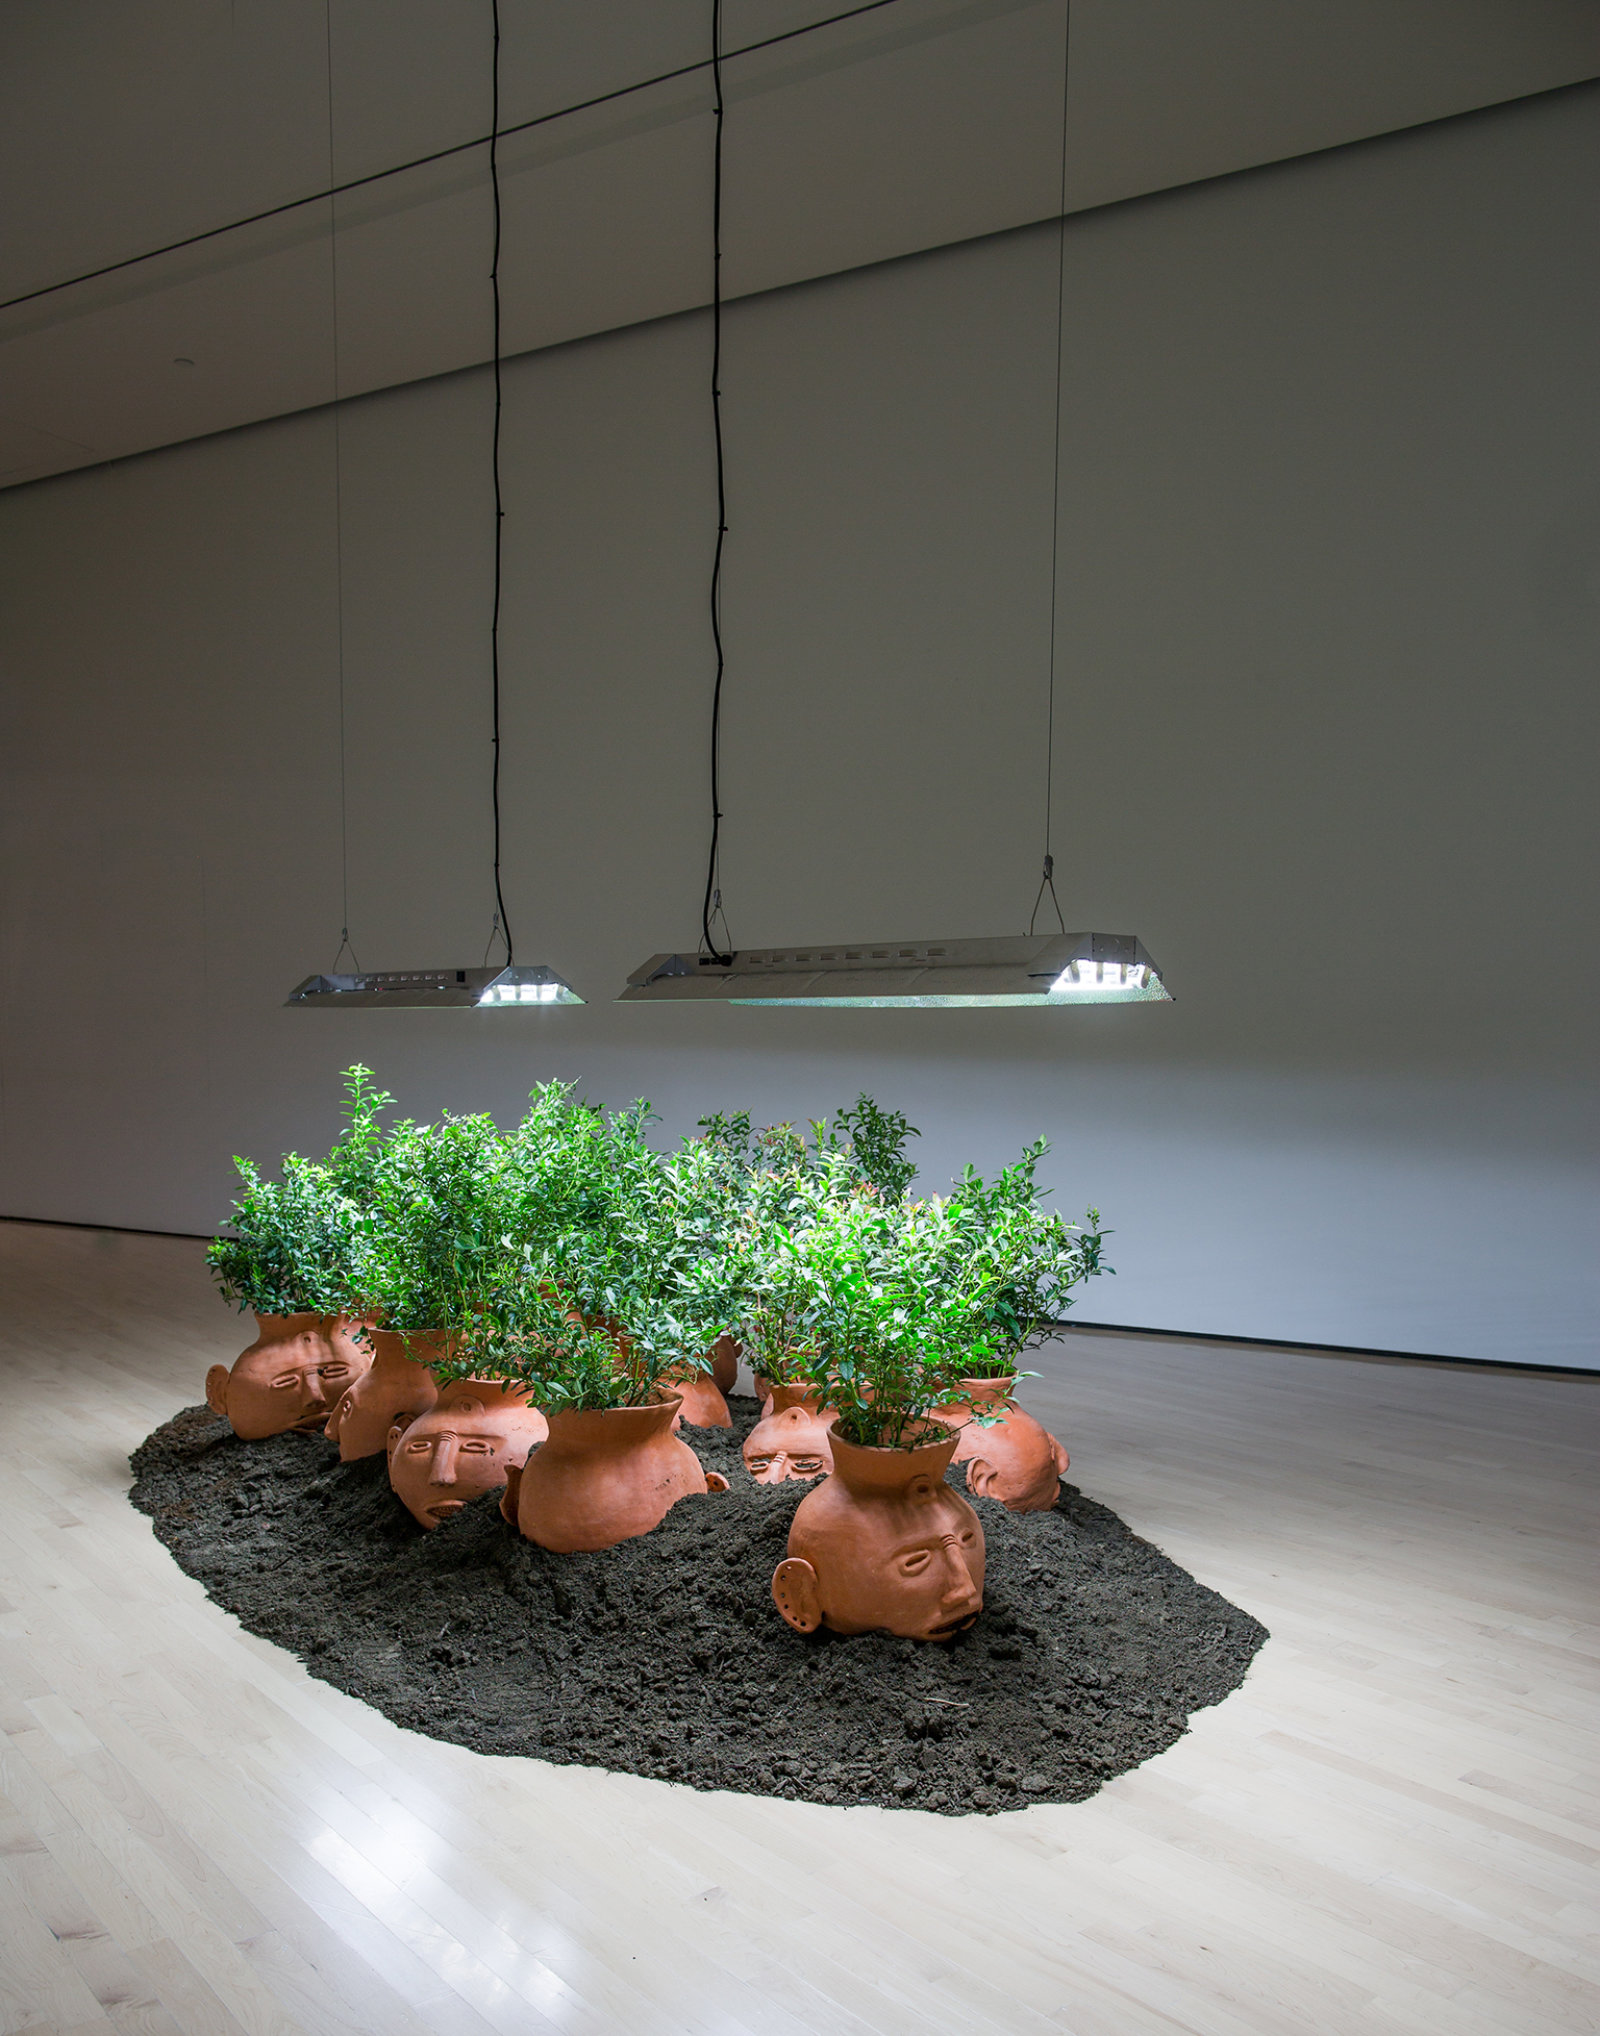 Duane Linklater, Blueberries for 15 vessels, 2012–2017, blueberry bushes, clay, earth, dimensions variable. Installation view, Field Station: Duane Linklater, MSU Broad, East Lansing, MI, 2017